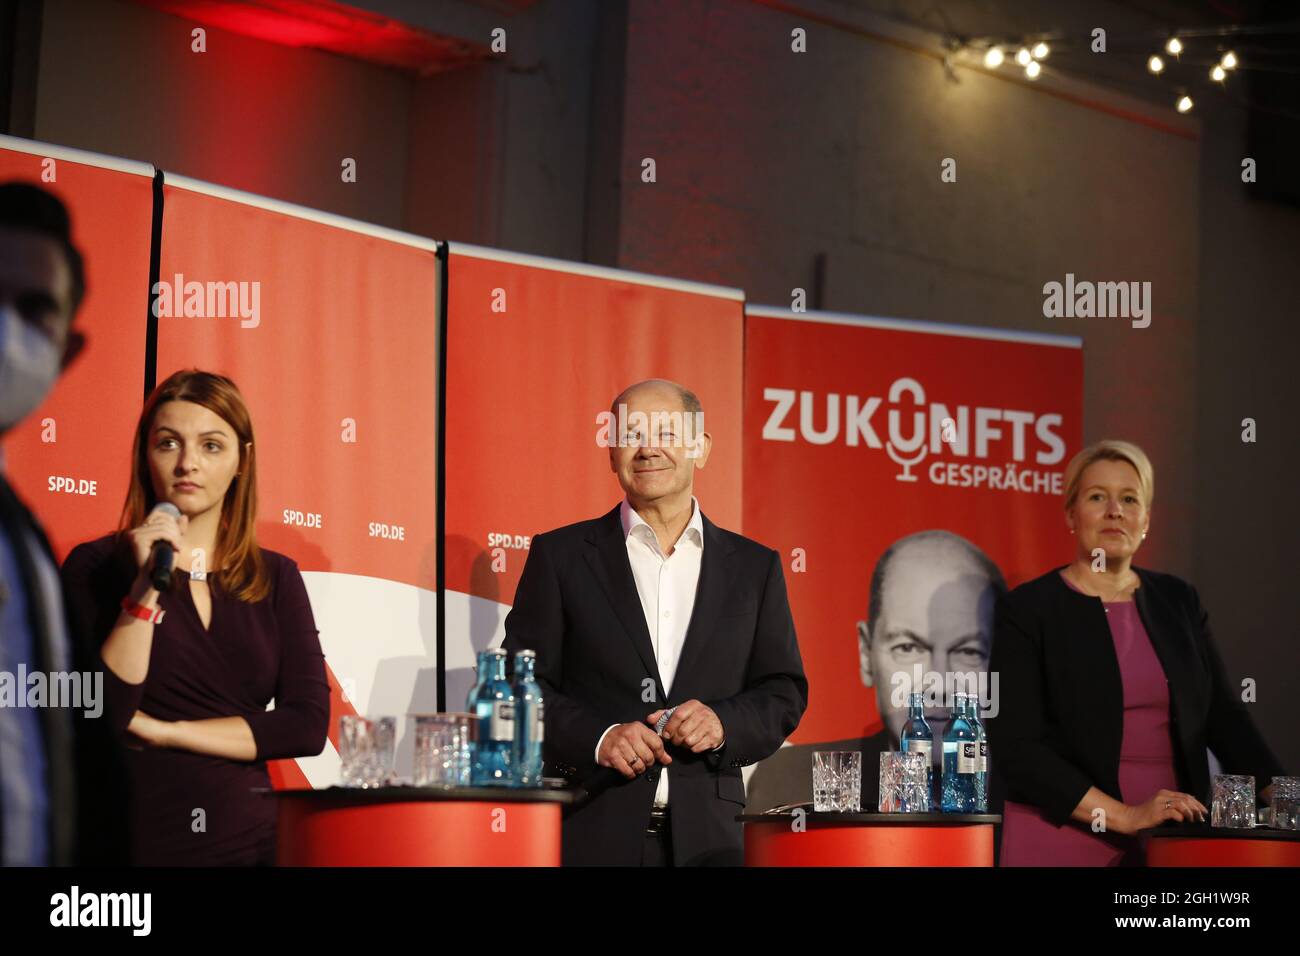 Berlin, Germany. 03rd Sep, 2021. Berlin-Treptow: The photo shows the chancellor candidate Olaf Scholz and the mayoral candidate Franziska Giffey on the stage in the garden of the Zenner restaurant in Berlin Treptow (Photo by Simone Kuhlmey/Pacific Press) Credit: Pacific Press Media Production Corp./Alamy Live News Stock Photo